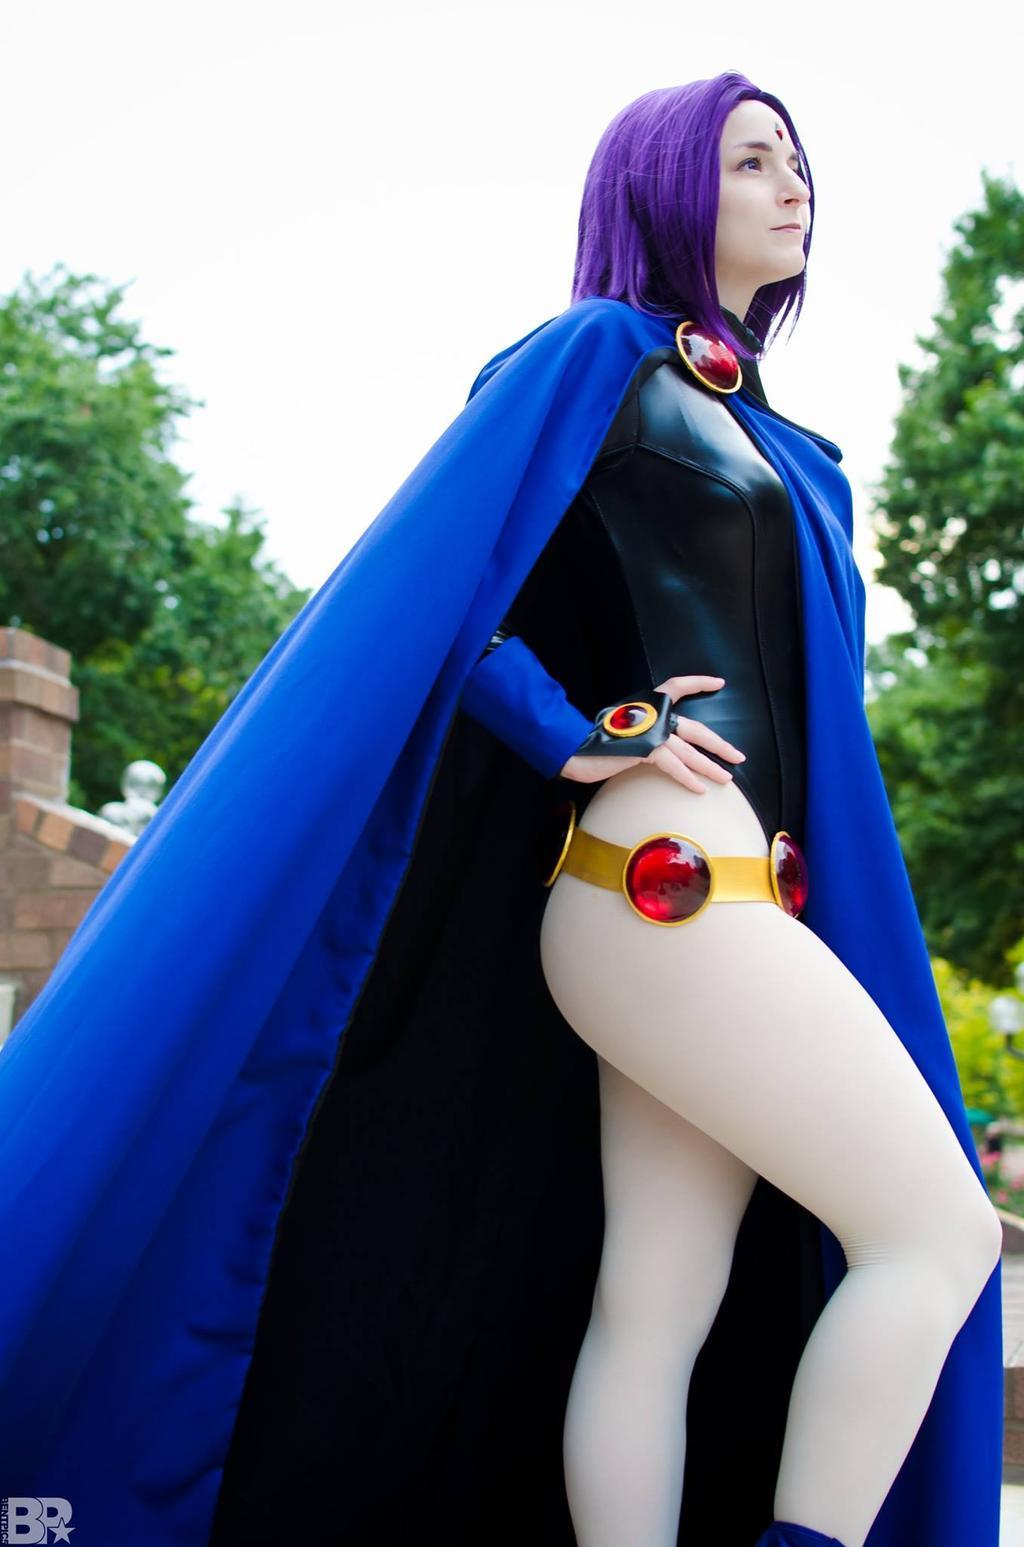 50+ Hot Pictures Of Raven From Teen Titans, DC Comics. 8